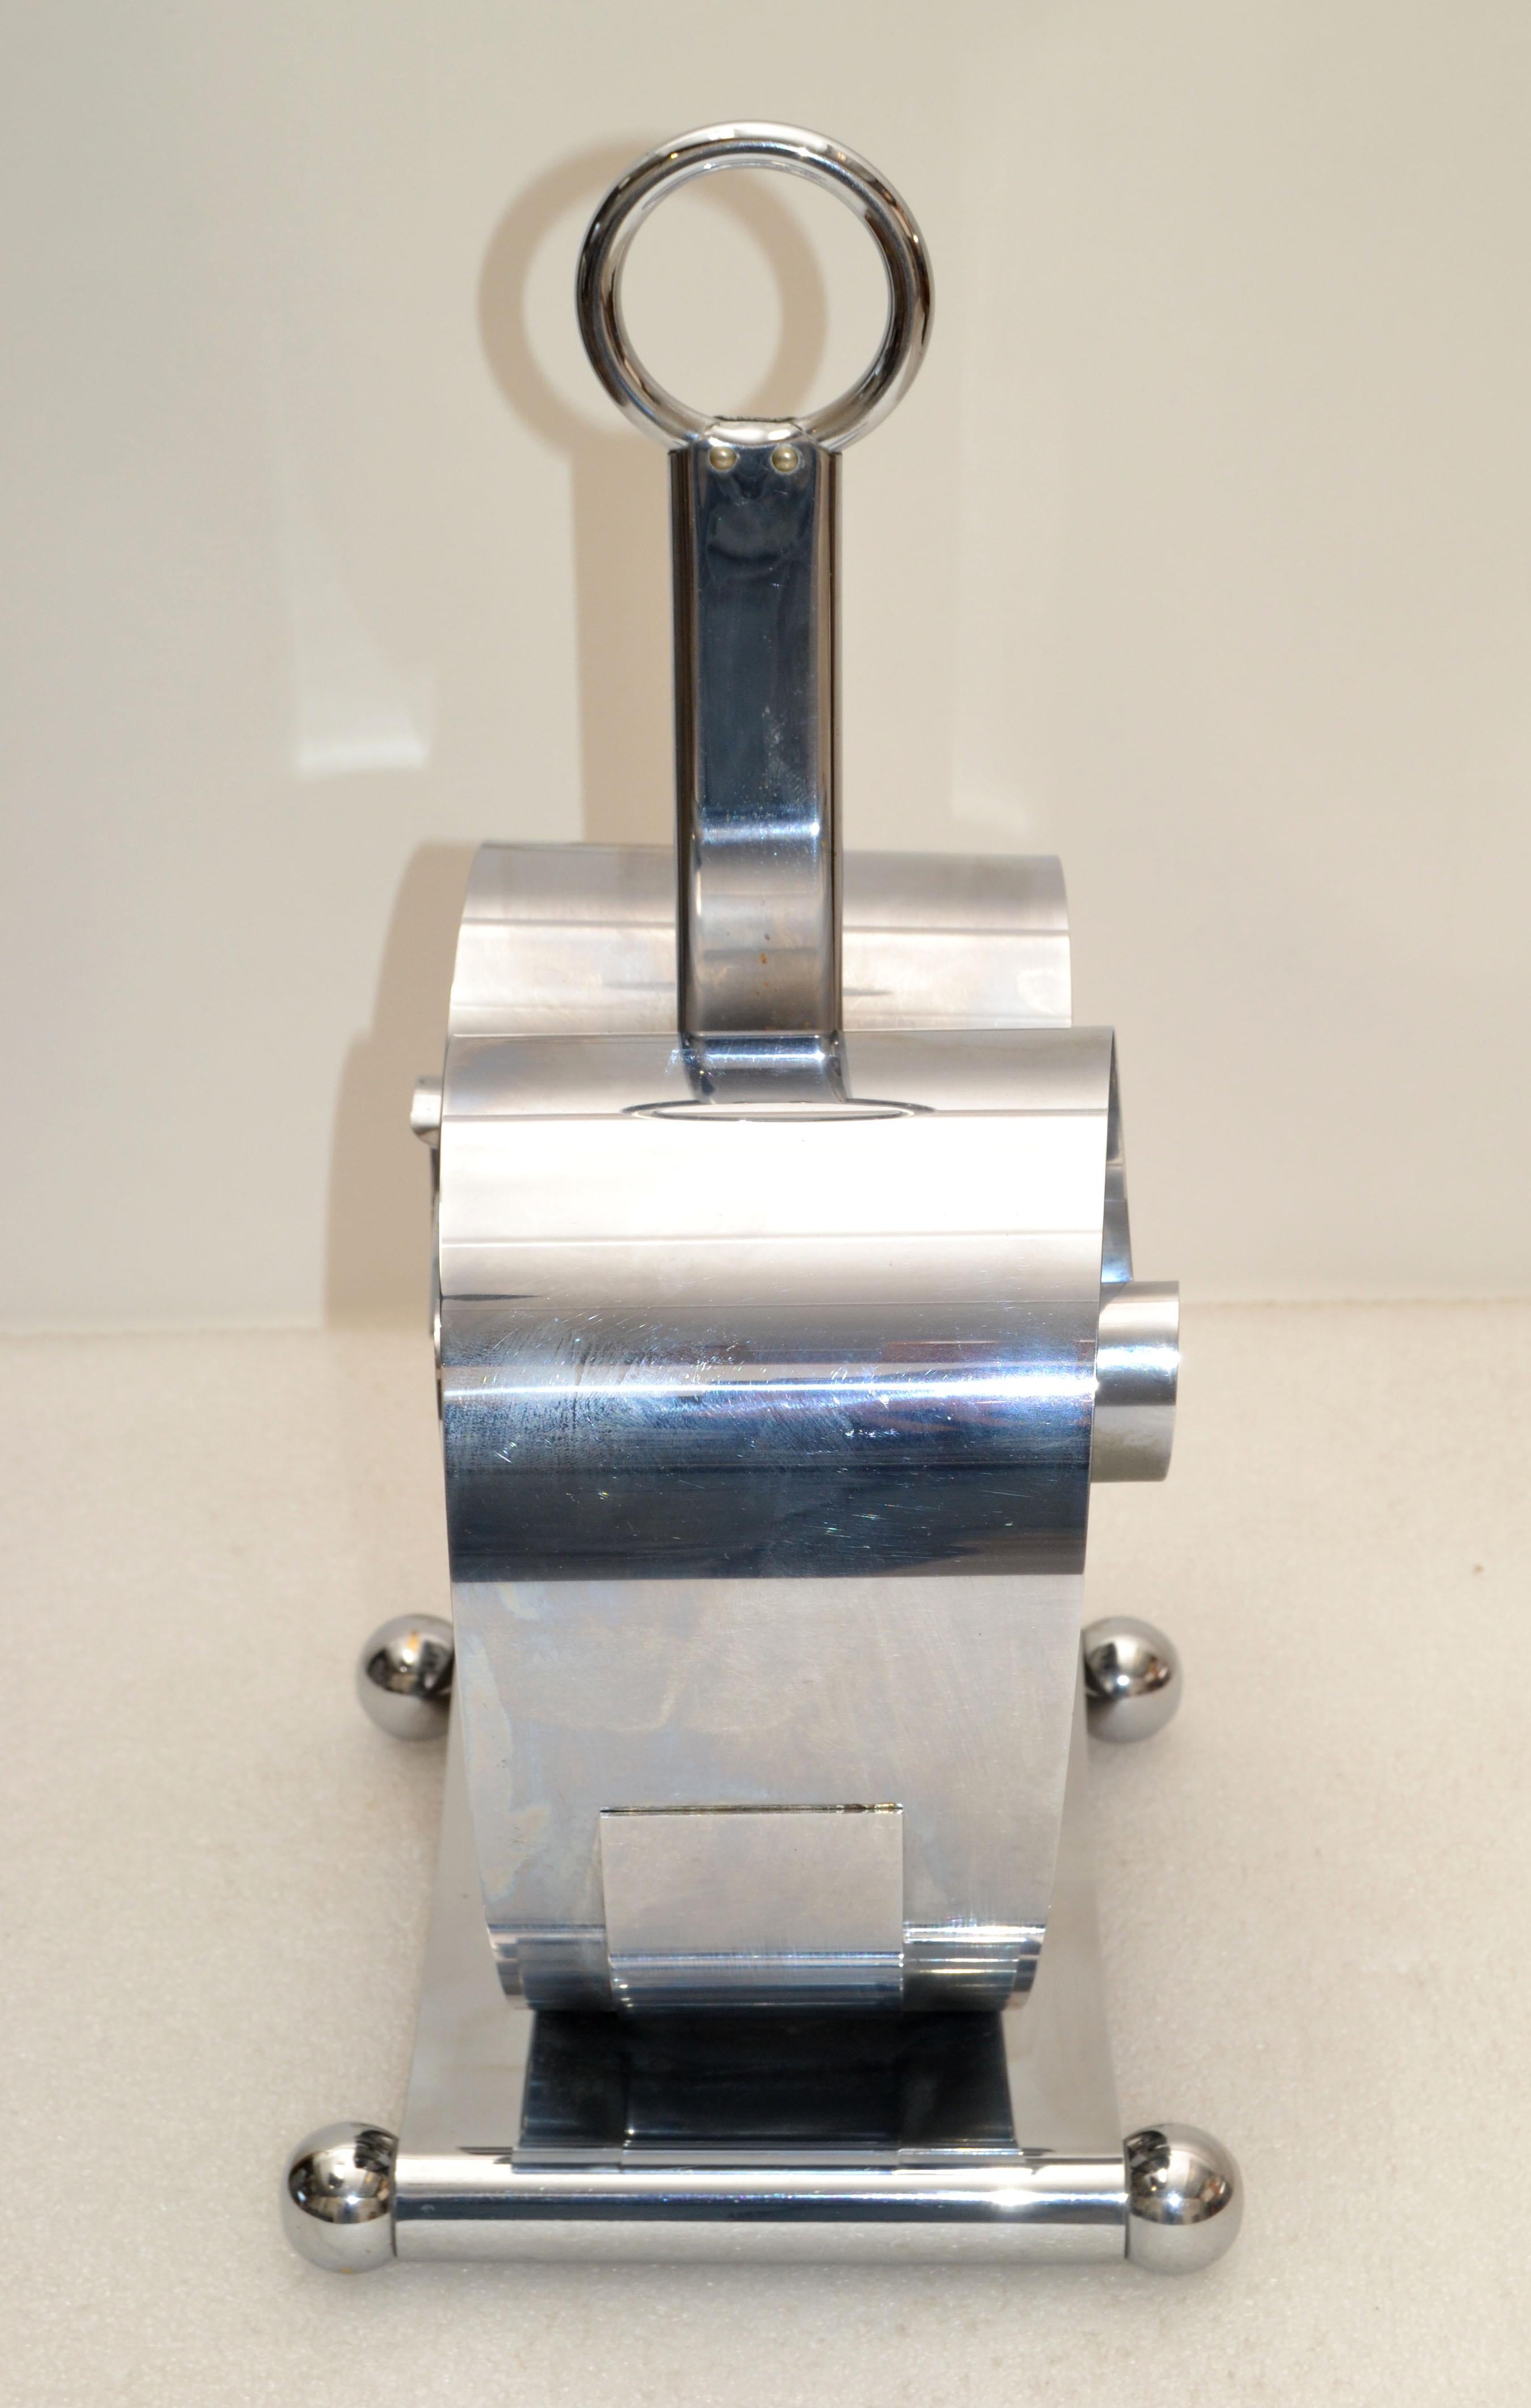 Art Deco Norman Bel Geddes Chrome Plated Stainless Steel Magazine Stand Rack 30s In Good Condition For Sale In Miami, FL